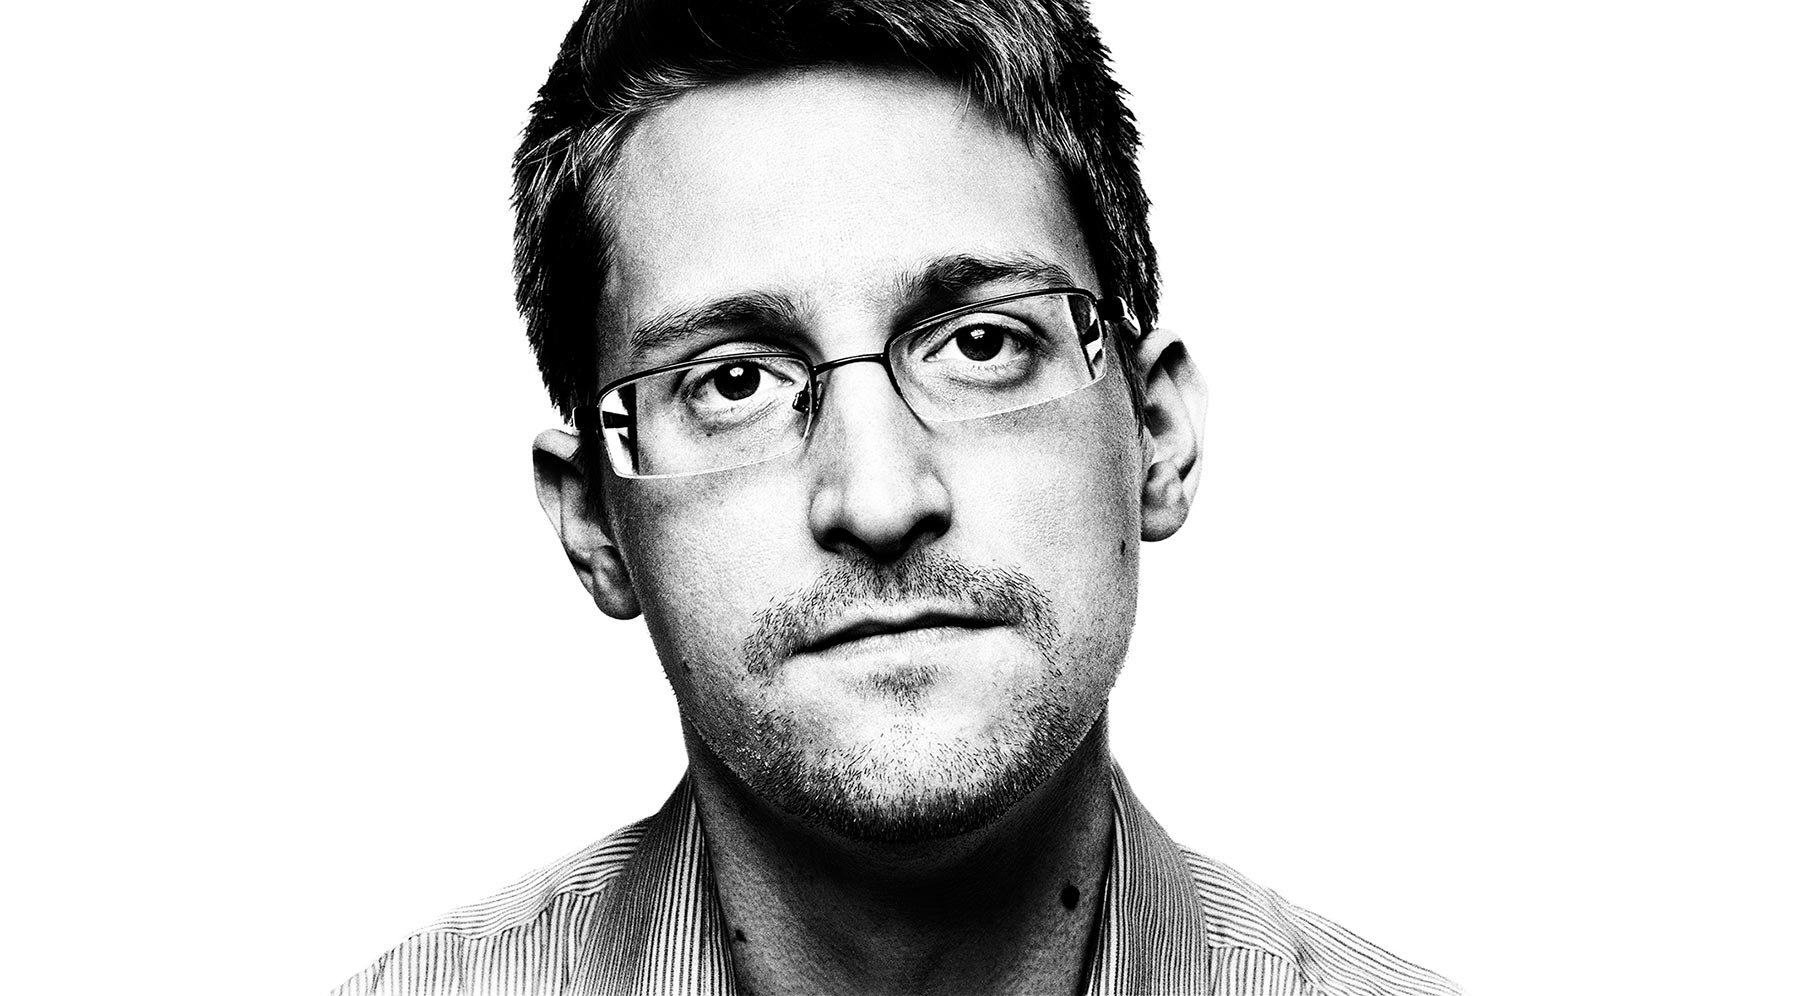 Edward Snowden...It was proven in a document leaked by Snowden that Microsoft betrayed customer privacy by giving access to things like Outlook chat, emails and thousands of Skype video calls to the NSA. Microsoft insists that they didn’t, but the evidence is damning, especially considering that in a six month period, Microsoft was served with over 6,000 criminal warrants to gather information.